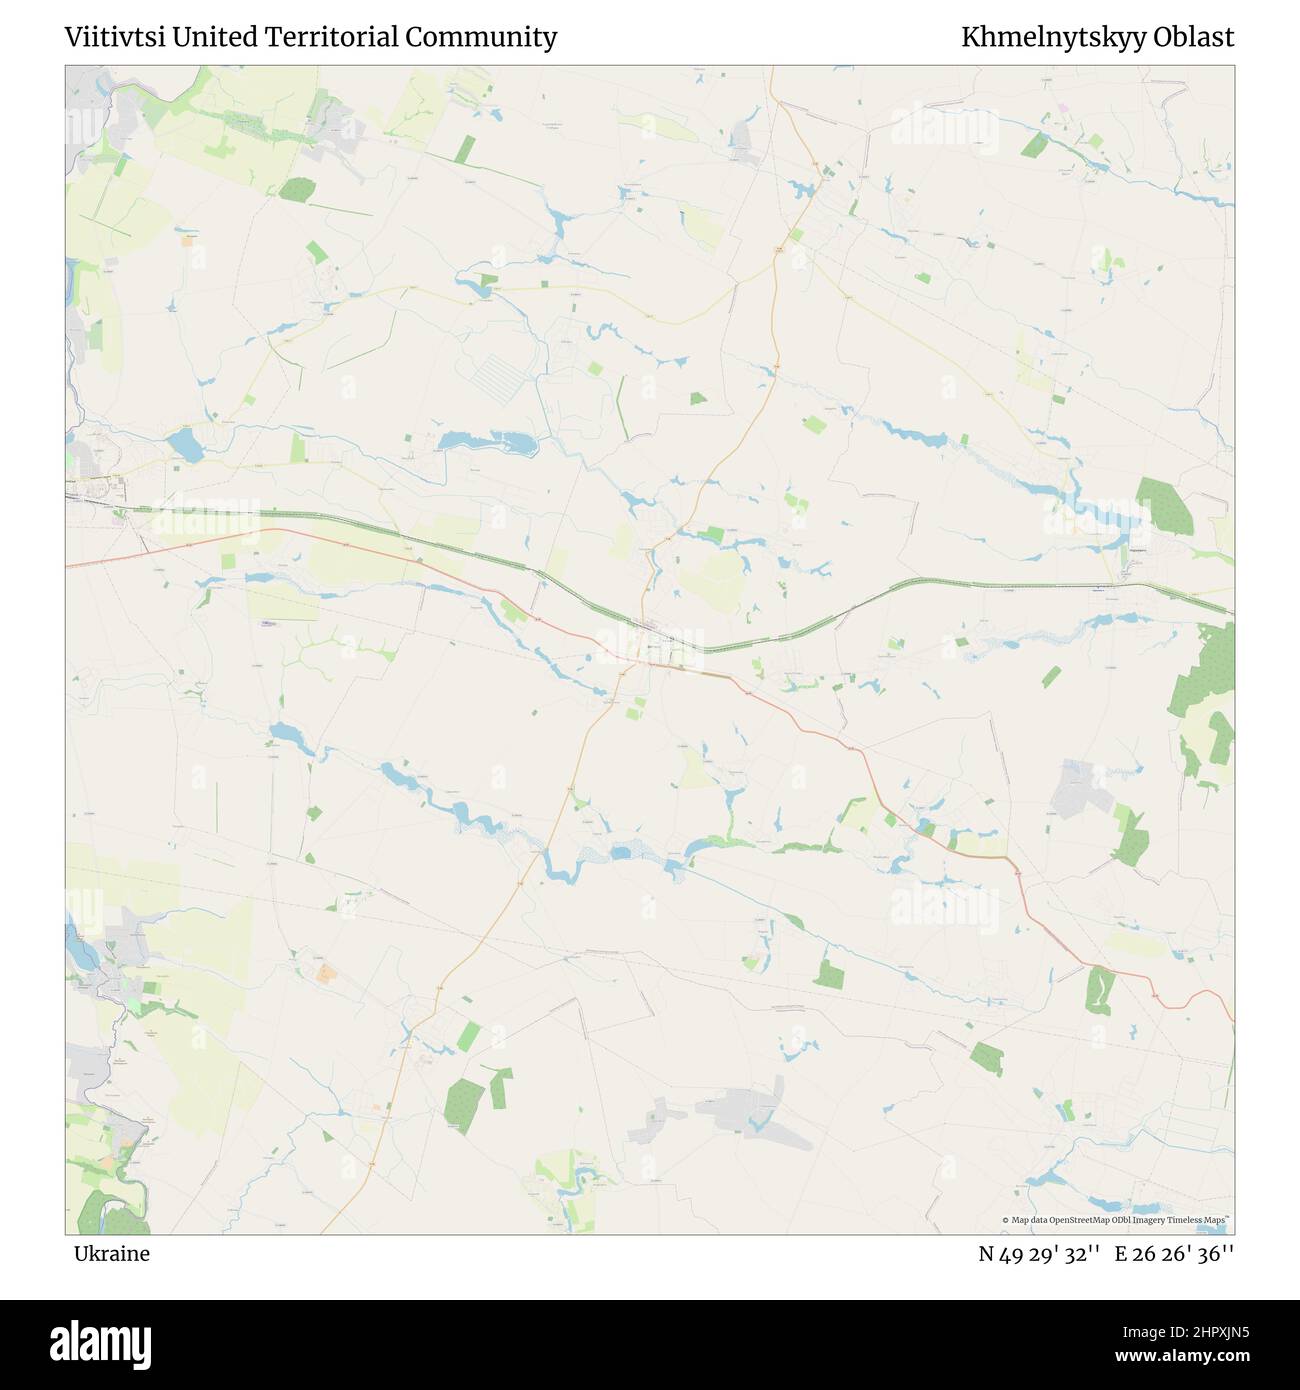 Viitivtsi United Territorial Community, Ukraine, Khmelnytskyy Oblast, N 49 29' 32'', E 26 26' 36'', map, Timeless Map published in 2021. Travelers, explorers and adventurers like Florence Nightingale, David Livingstone, Ernest Shackleton, Lewis and Clark and Sherlock Holmes relied on maps to plan travels to the world's most remote corners, Timeless Maps is mapping most locations on the globe, showing the achievement of great dreams Stock Photo